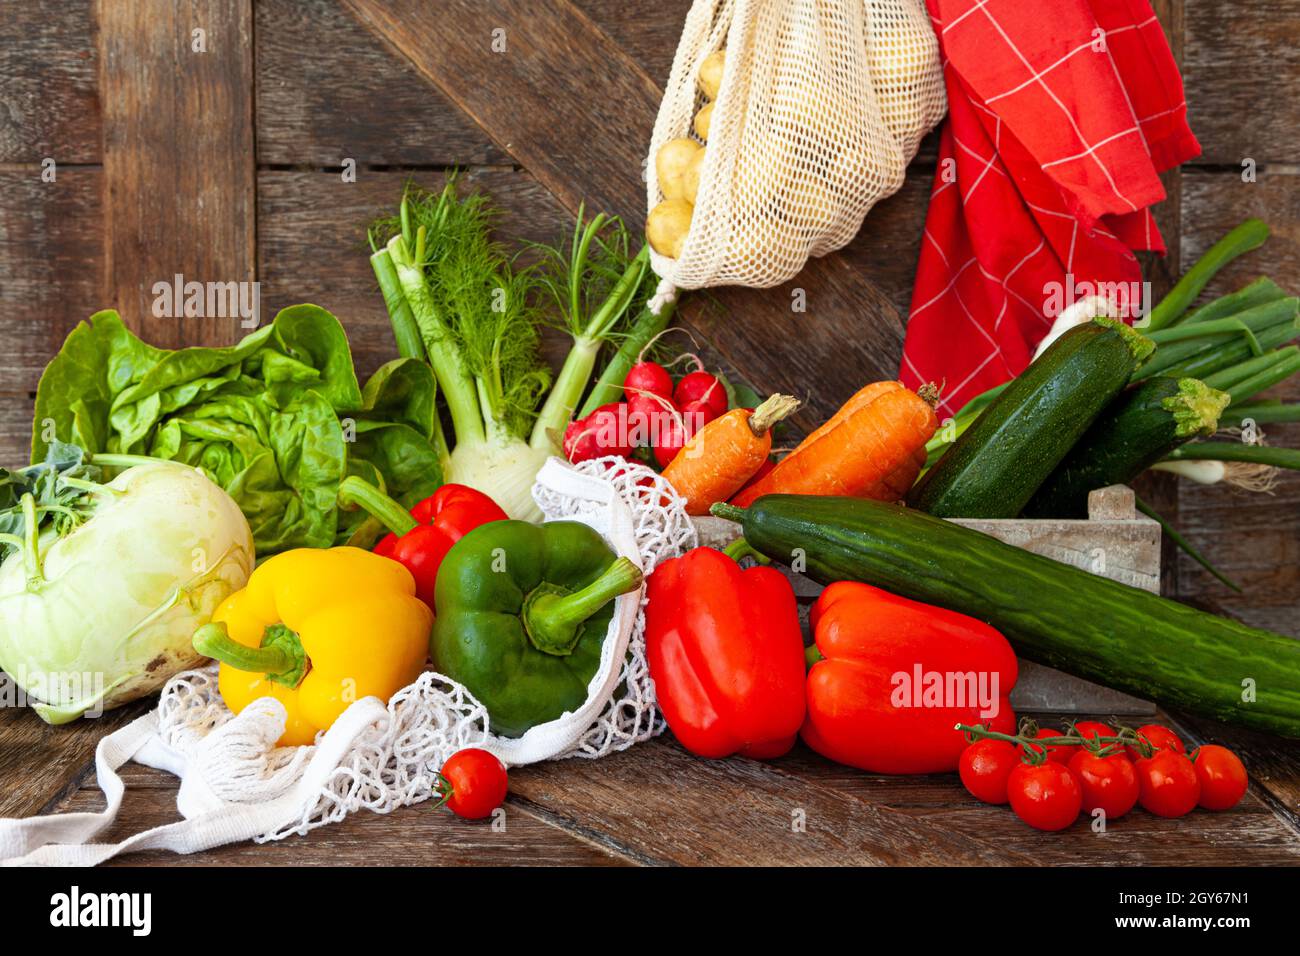 Colorful variety of fresh vegetables on rustic wooden background Stock Photo